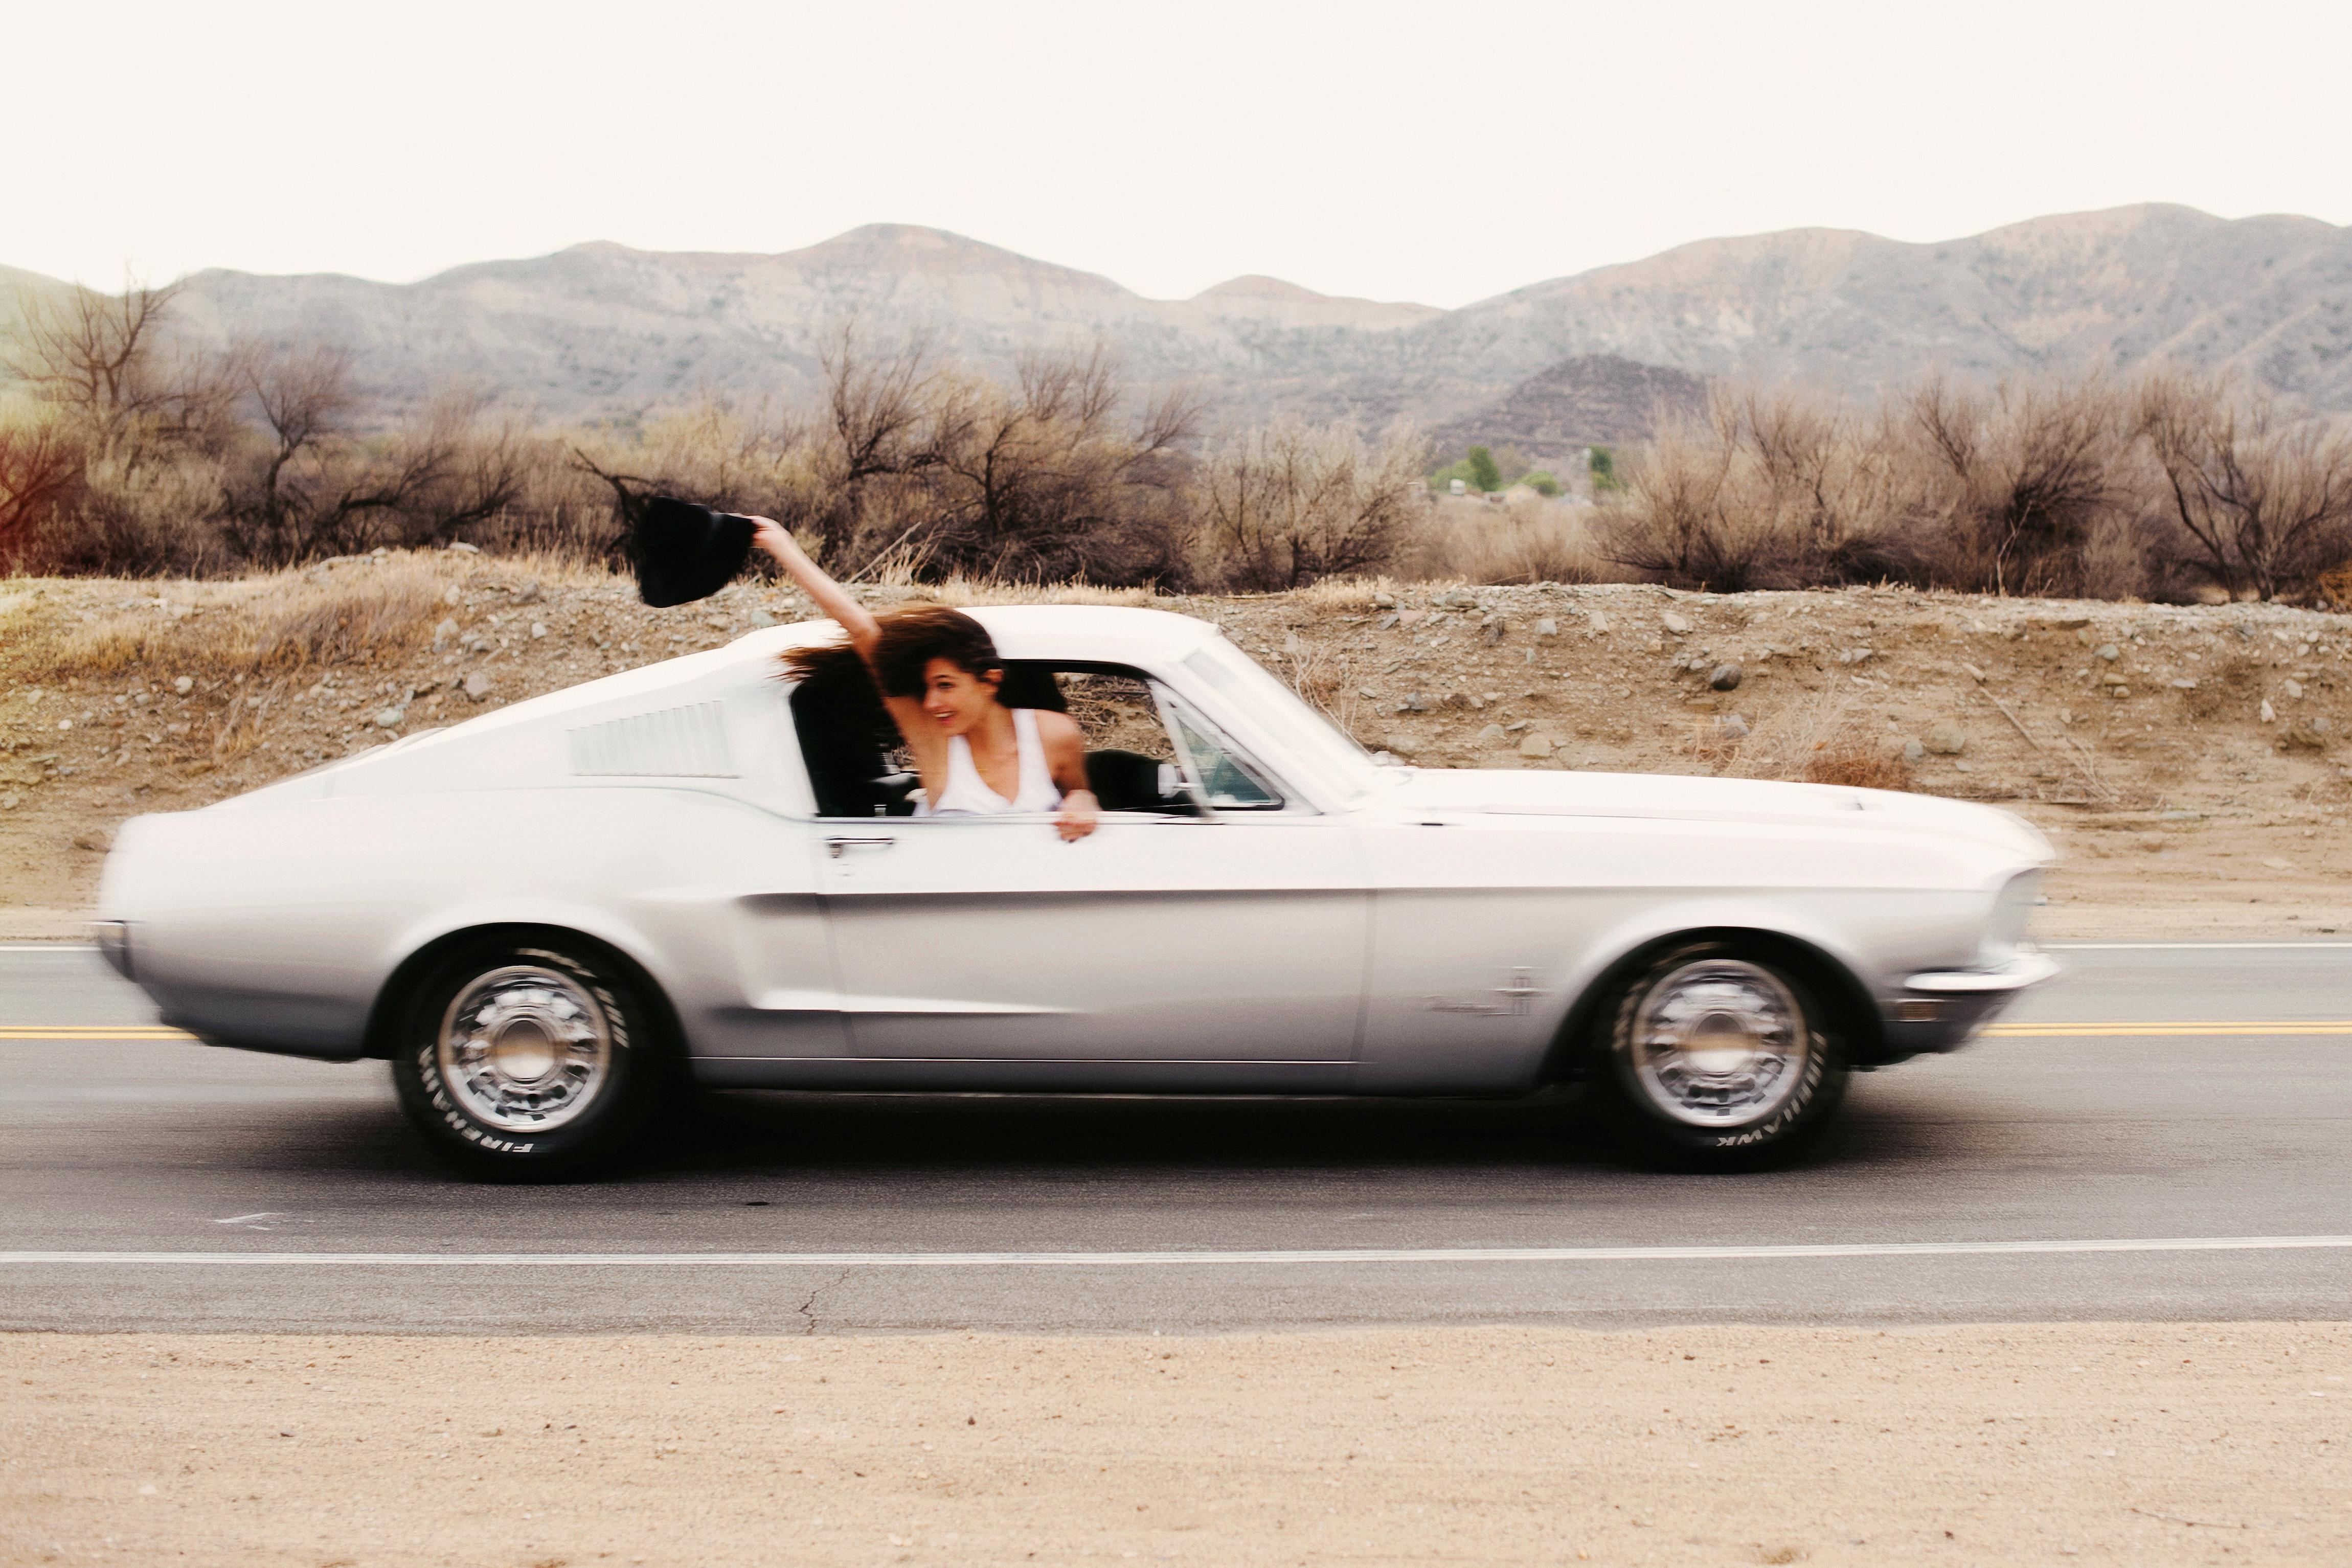 "Untitled 1" (Mustang) Original photography Edition 2/7 by Larsen Sotelo 